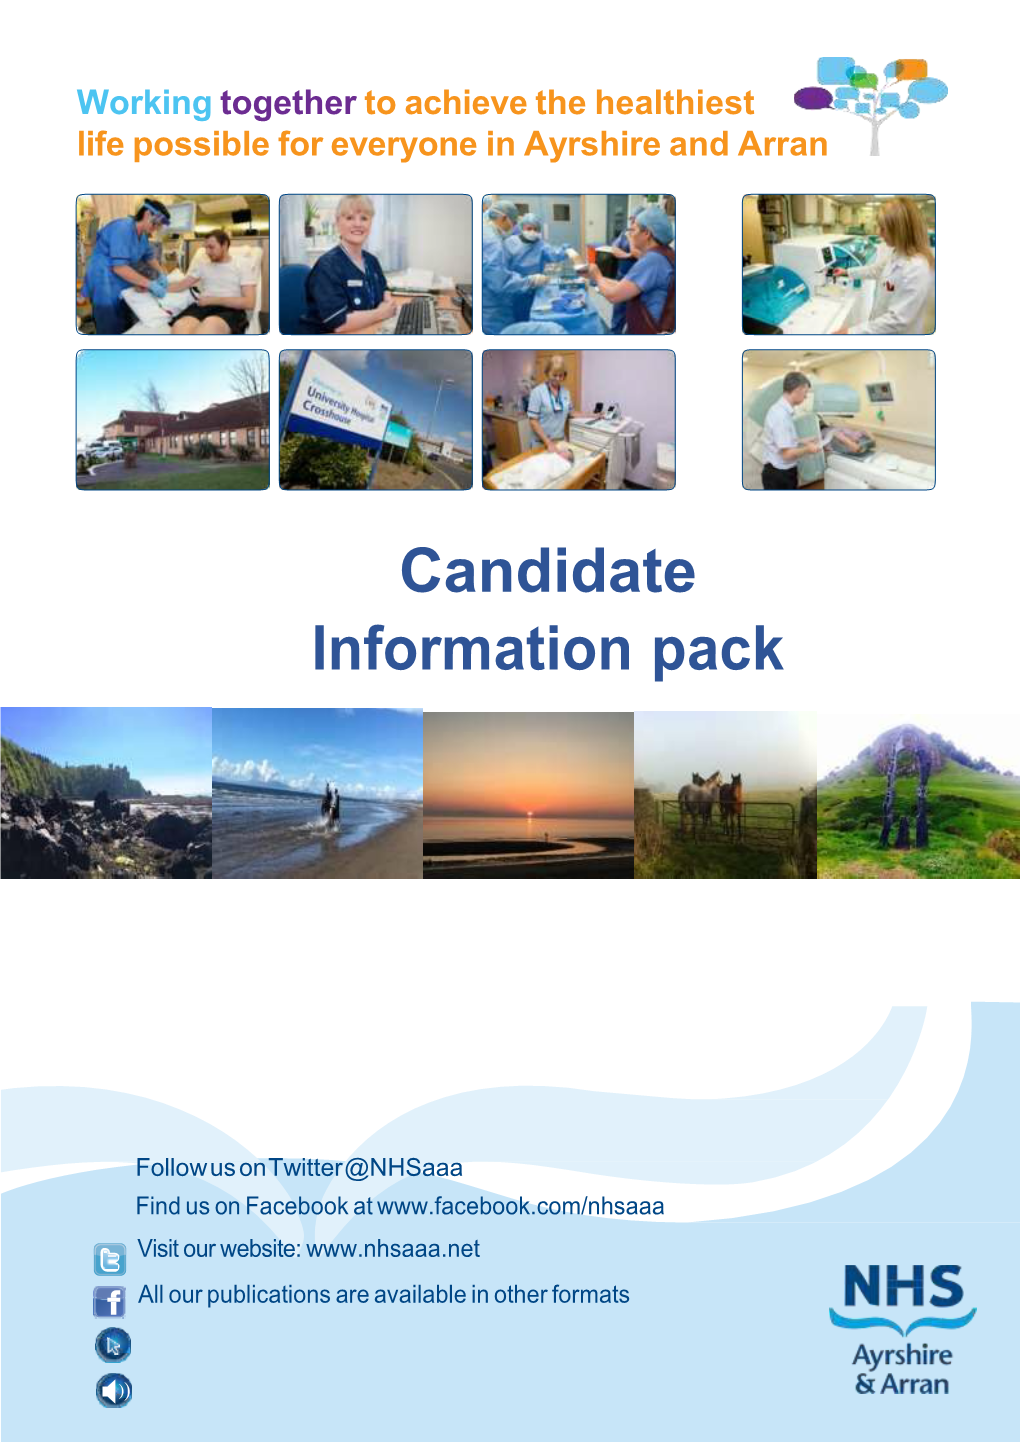 Candidate Information Pack